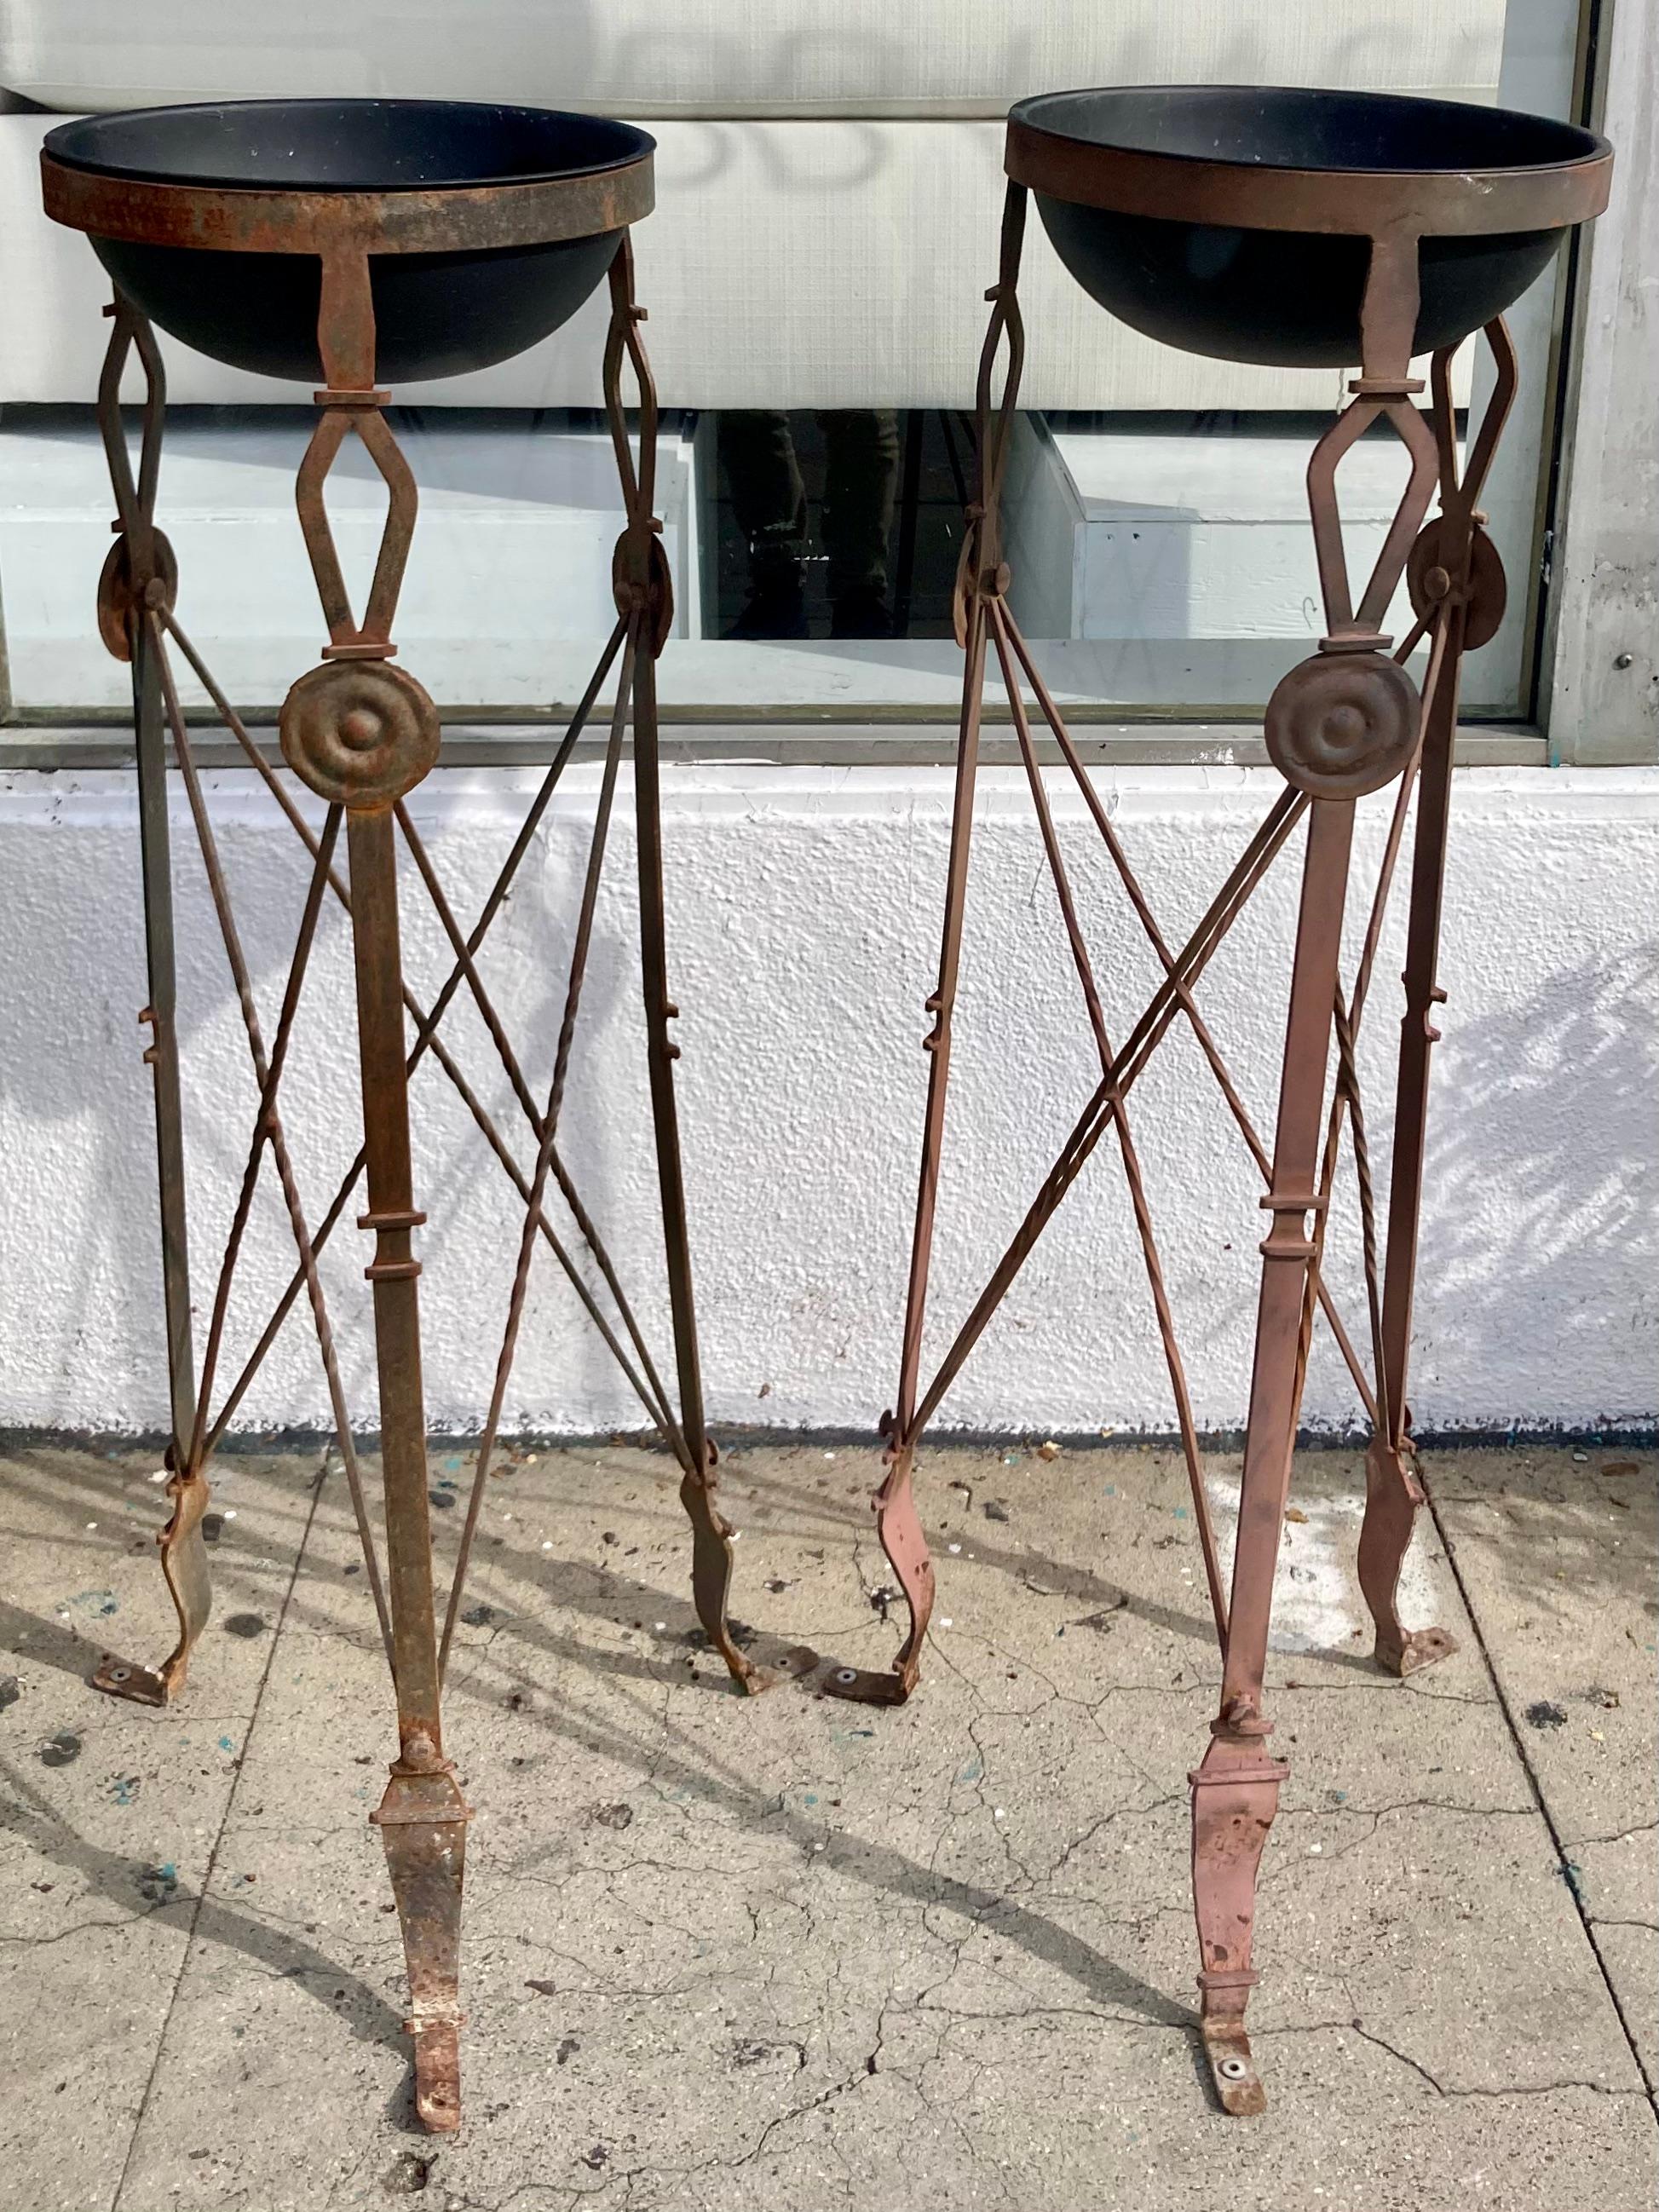 Beautiful classical pair of French empire iron plant stands. Great addition to your French architectural inspired interiors and outdoors. Each will hold 3 or 4 orchids!